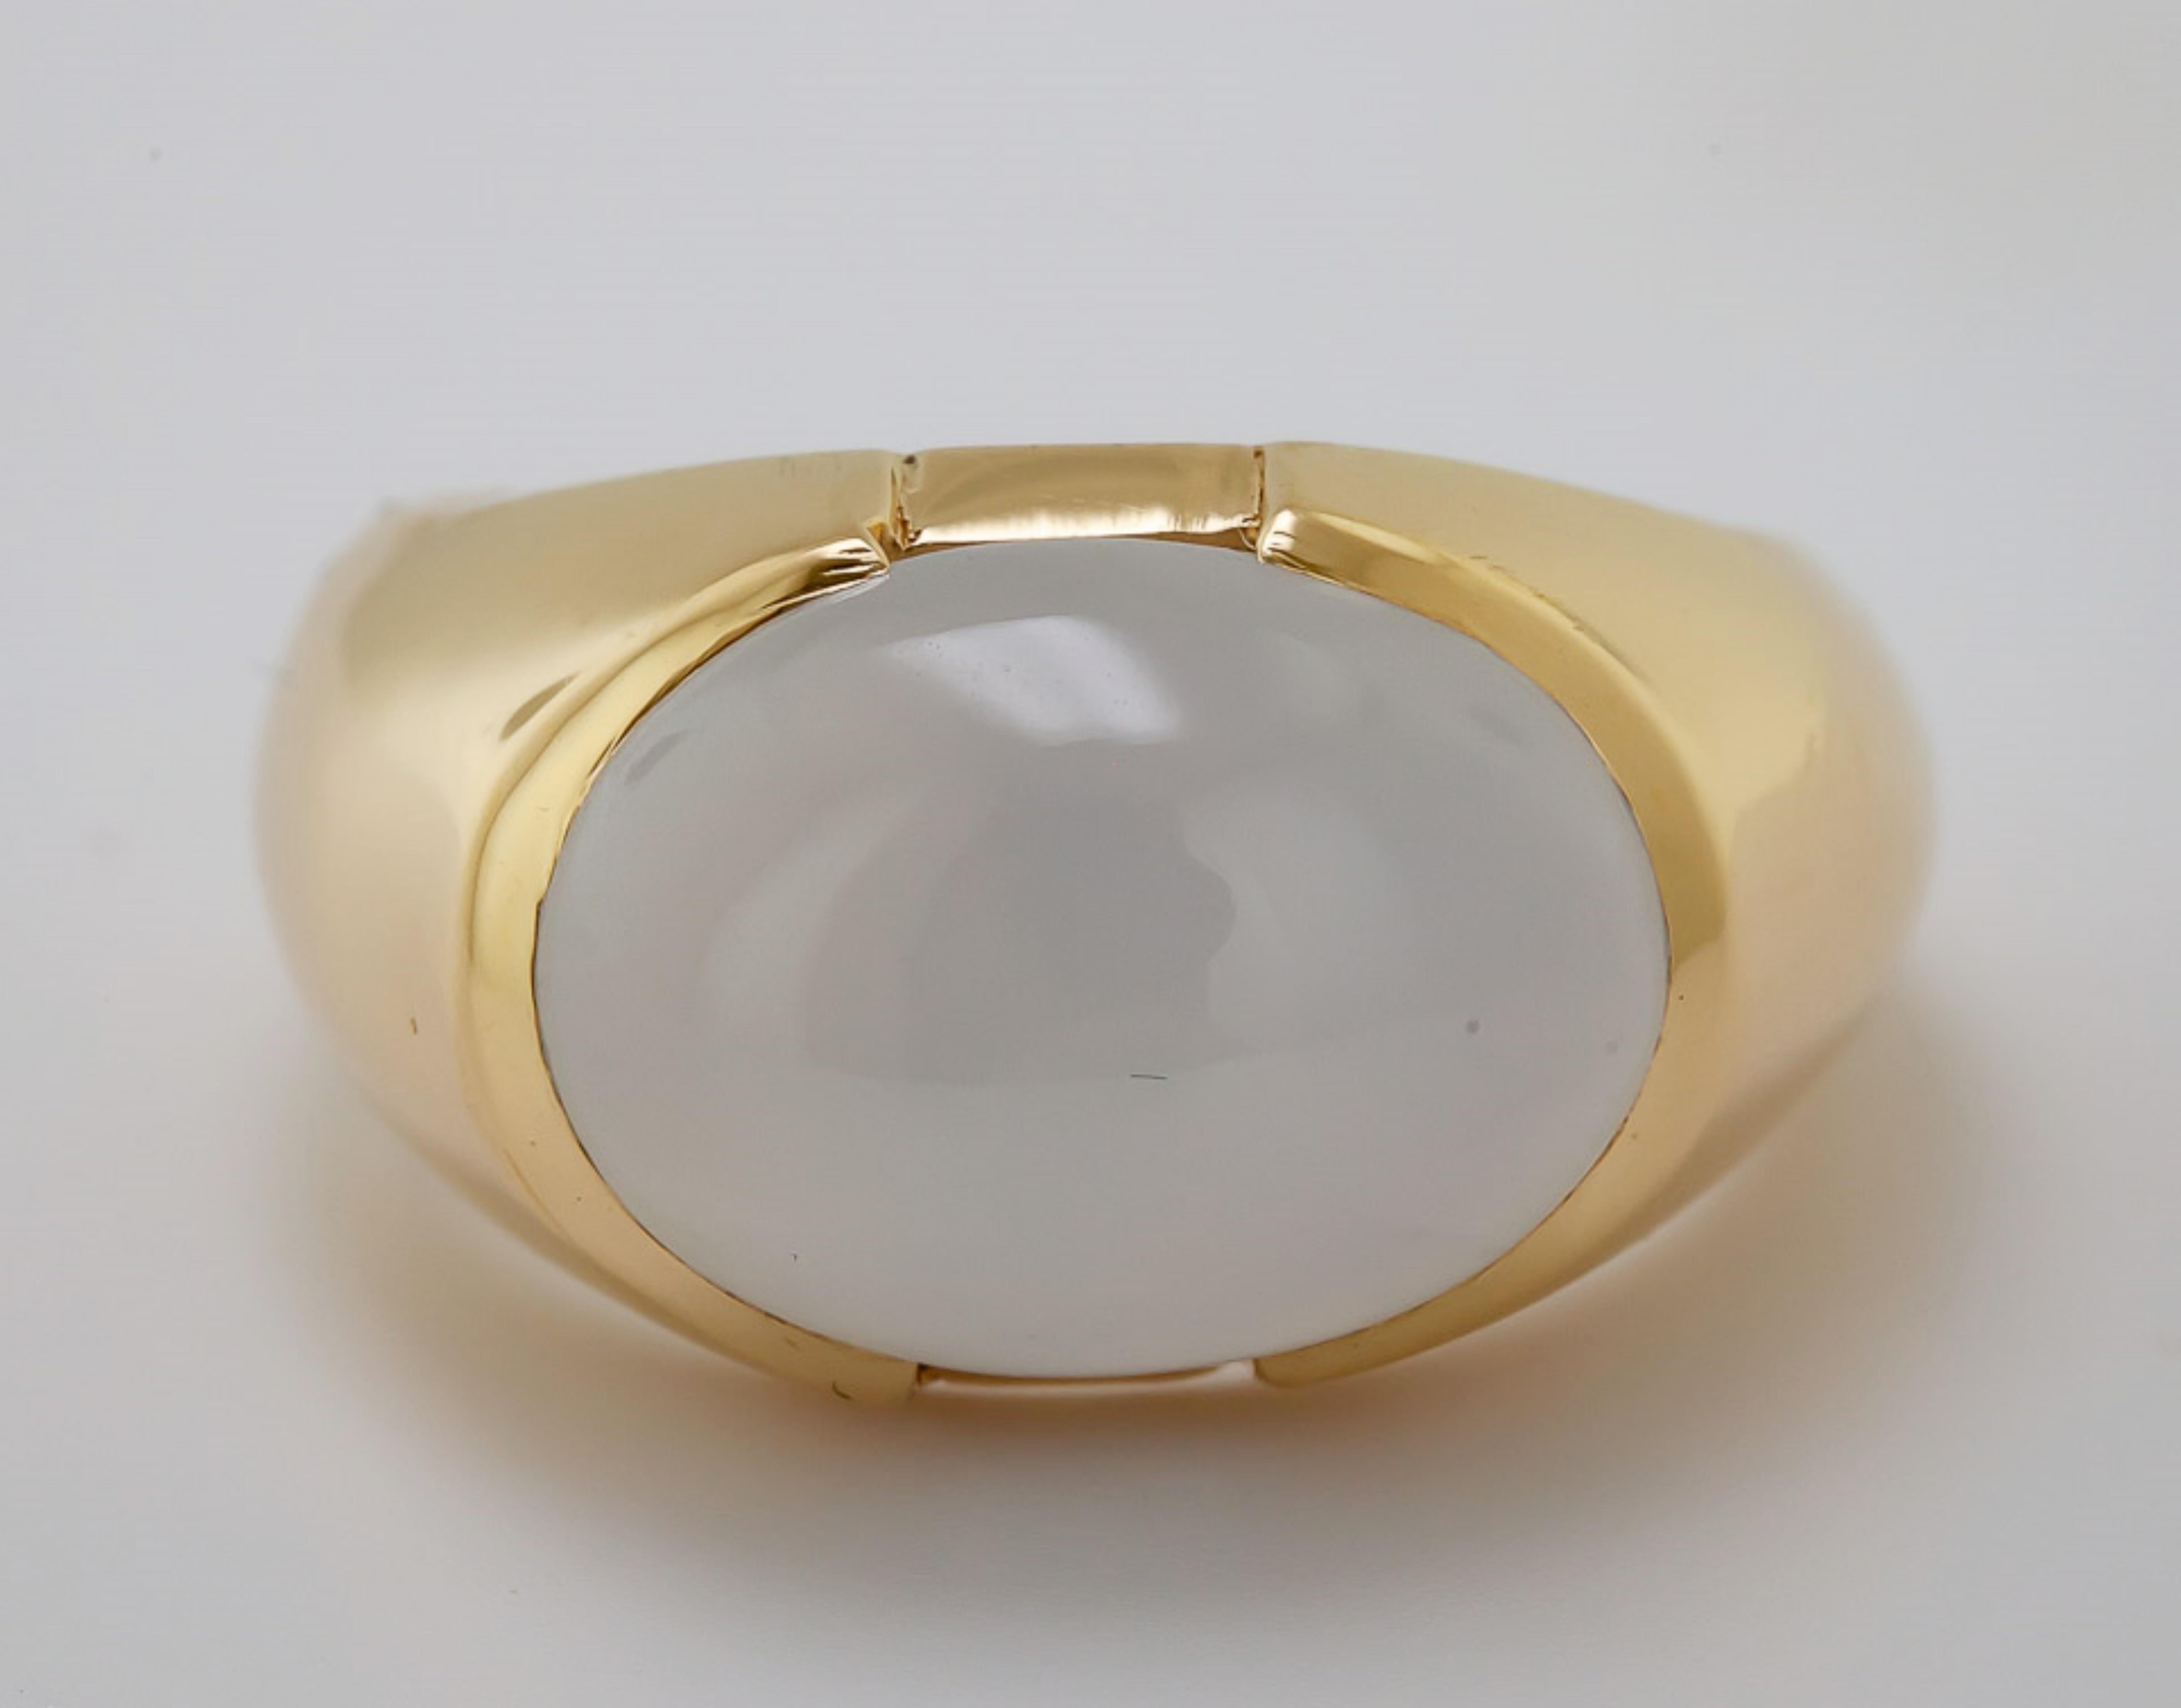 Featuring one natural, white, translucent, oval double cabochon jadeite jade, 19.9 X 10.55 X 6.00 mm, accompanied by a GIA Report, stating No indication of impregnation, bezel set in an 18k yellow gold mounting, measuring approximately 12 mm to 3.5